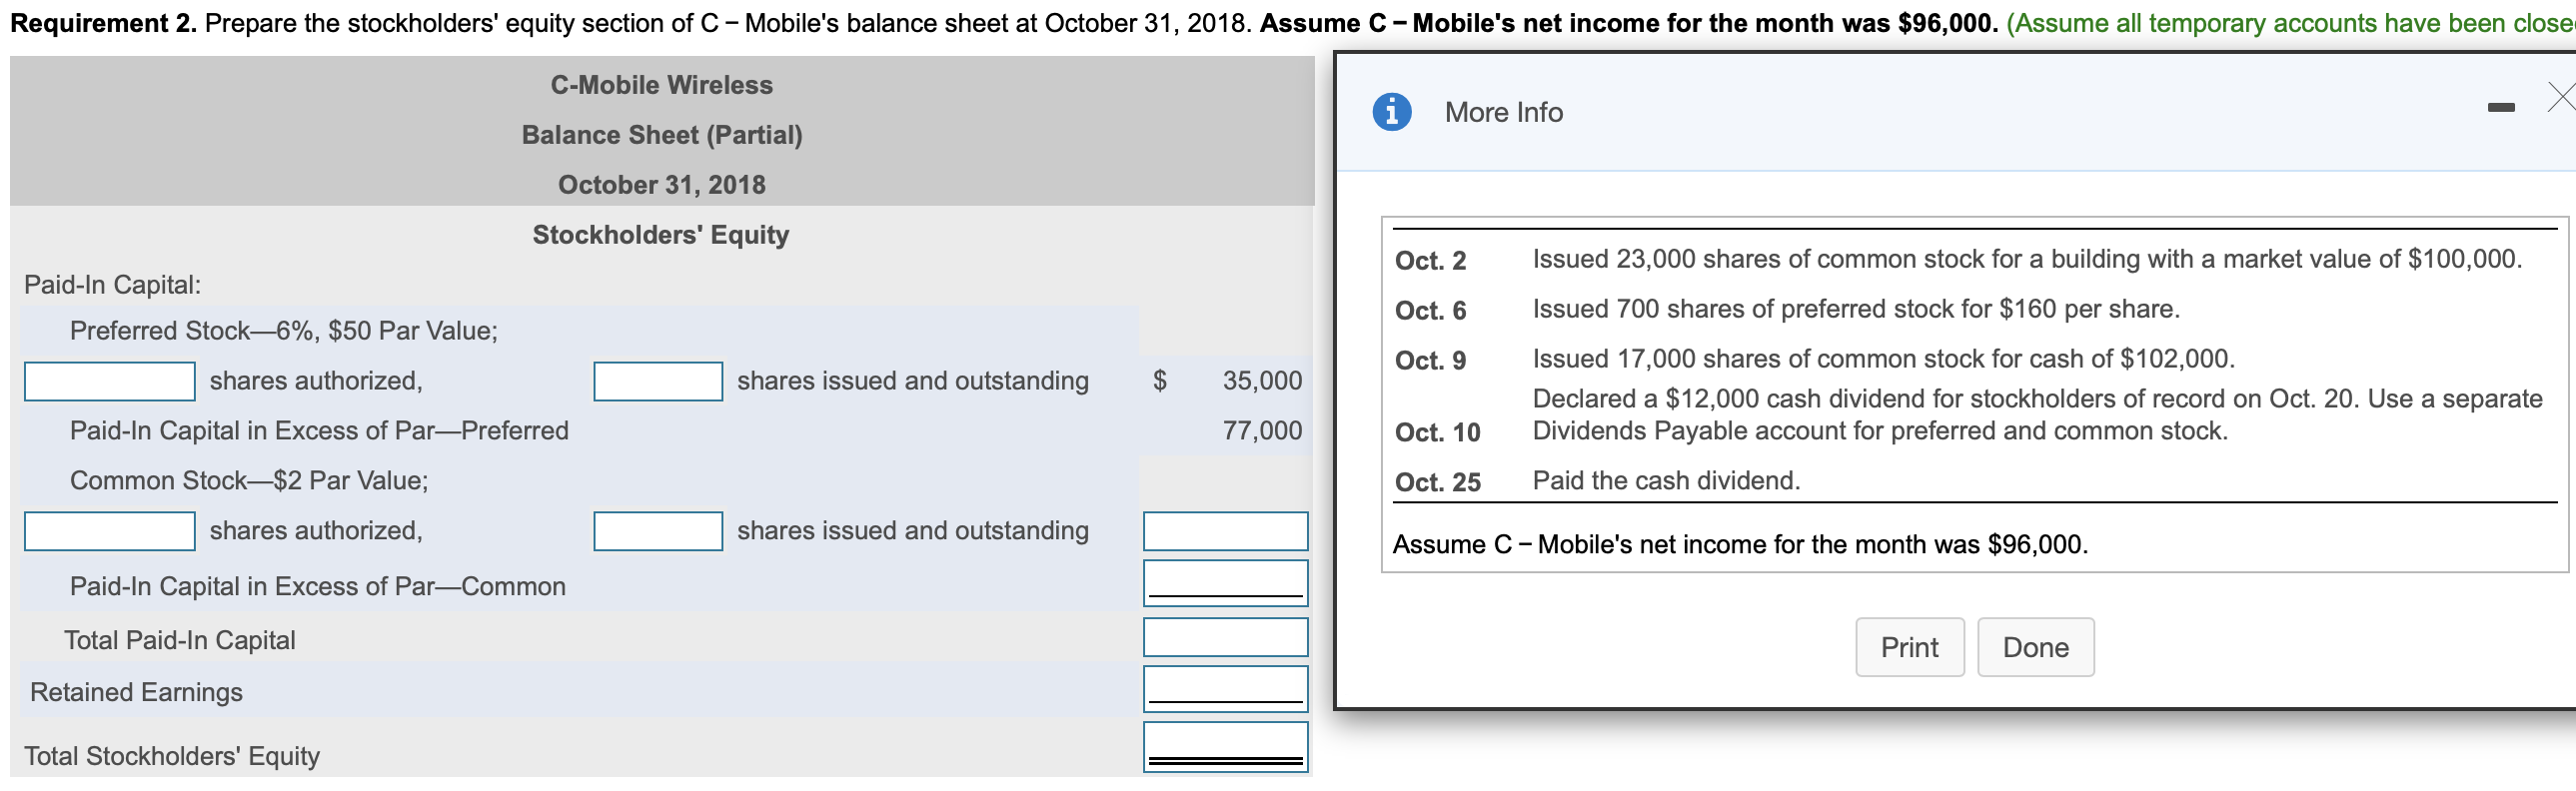 Requirement 2. Prepare the stockholders' equity section of C- Mobile's balance sheet at October 31, 2018. Assume C- Mobile's net income for the month was $96,000. (Assume all temporary accounts have been close
C-Mobile Wireless
More Info
Balance Sheet (Partial)
October 31, 2018
Stockholders' Equity
Oct. 2
Issued 23,000 shares of common stock for a building with a market value of $100,000.
Paid-In Capital:
Oct. 6
Issued 700 shares of preferred stock for $160 per share.
Preferred Stock–6%, $50 Par Value;
Oct. 9
Issued 17,000 shares of common stock for cash of $102,000.
shares authorized,
shares issued and outstanding
35,000
Declared a $12,000 cash dividend for stockholders of record on Oct. 20. Use a separate
Dividends Payable account for preferred and common stock.
Paid-In Capital in Excess of Par-Preferred
77,000
Oct. 10
Common Stock-$2 Par Value;
Oct. 25
Paid the cash dividend.
shares authorized,
shares issued and outstanding
Assume C- Mobile's net income for the month was $96,000.
Paid-In Capital in Excess of Par-Common
Total Paid-In Capital
Print
Done
Retained Earnings
Total Stockholders' Equity
